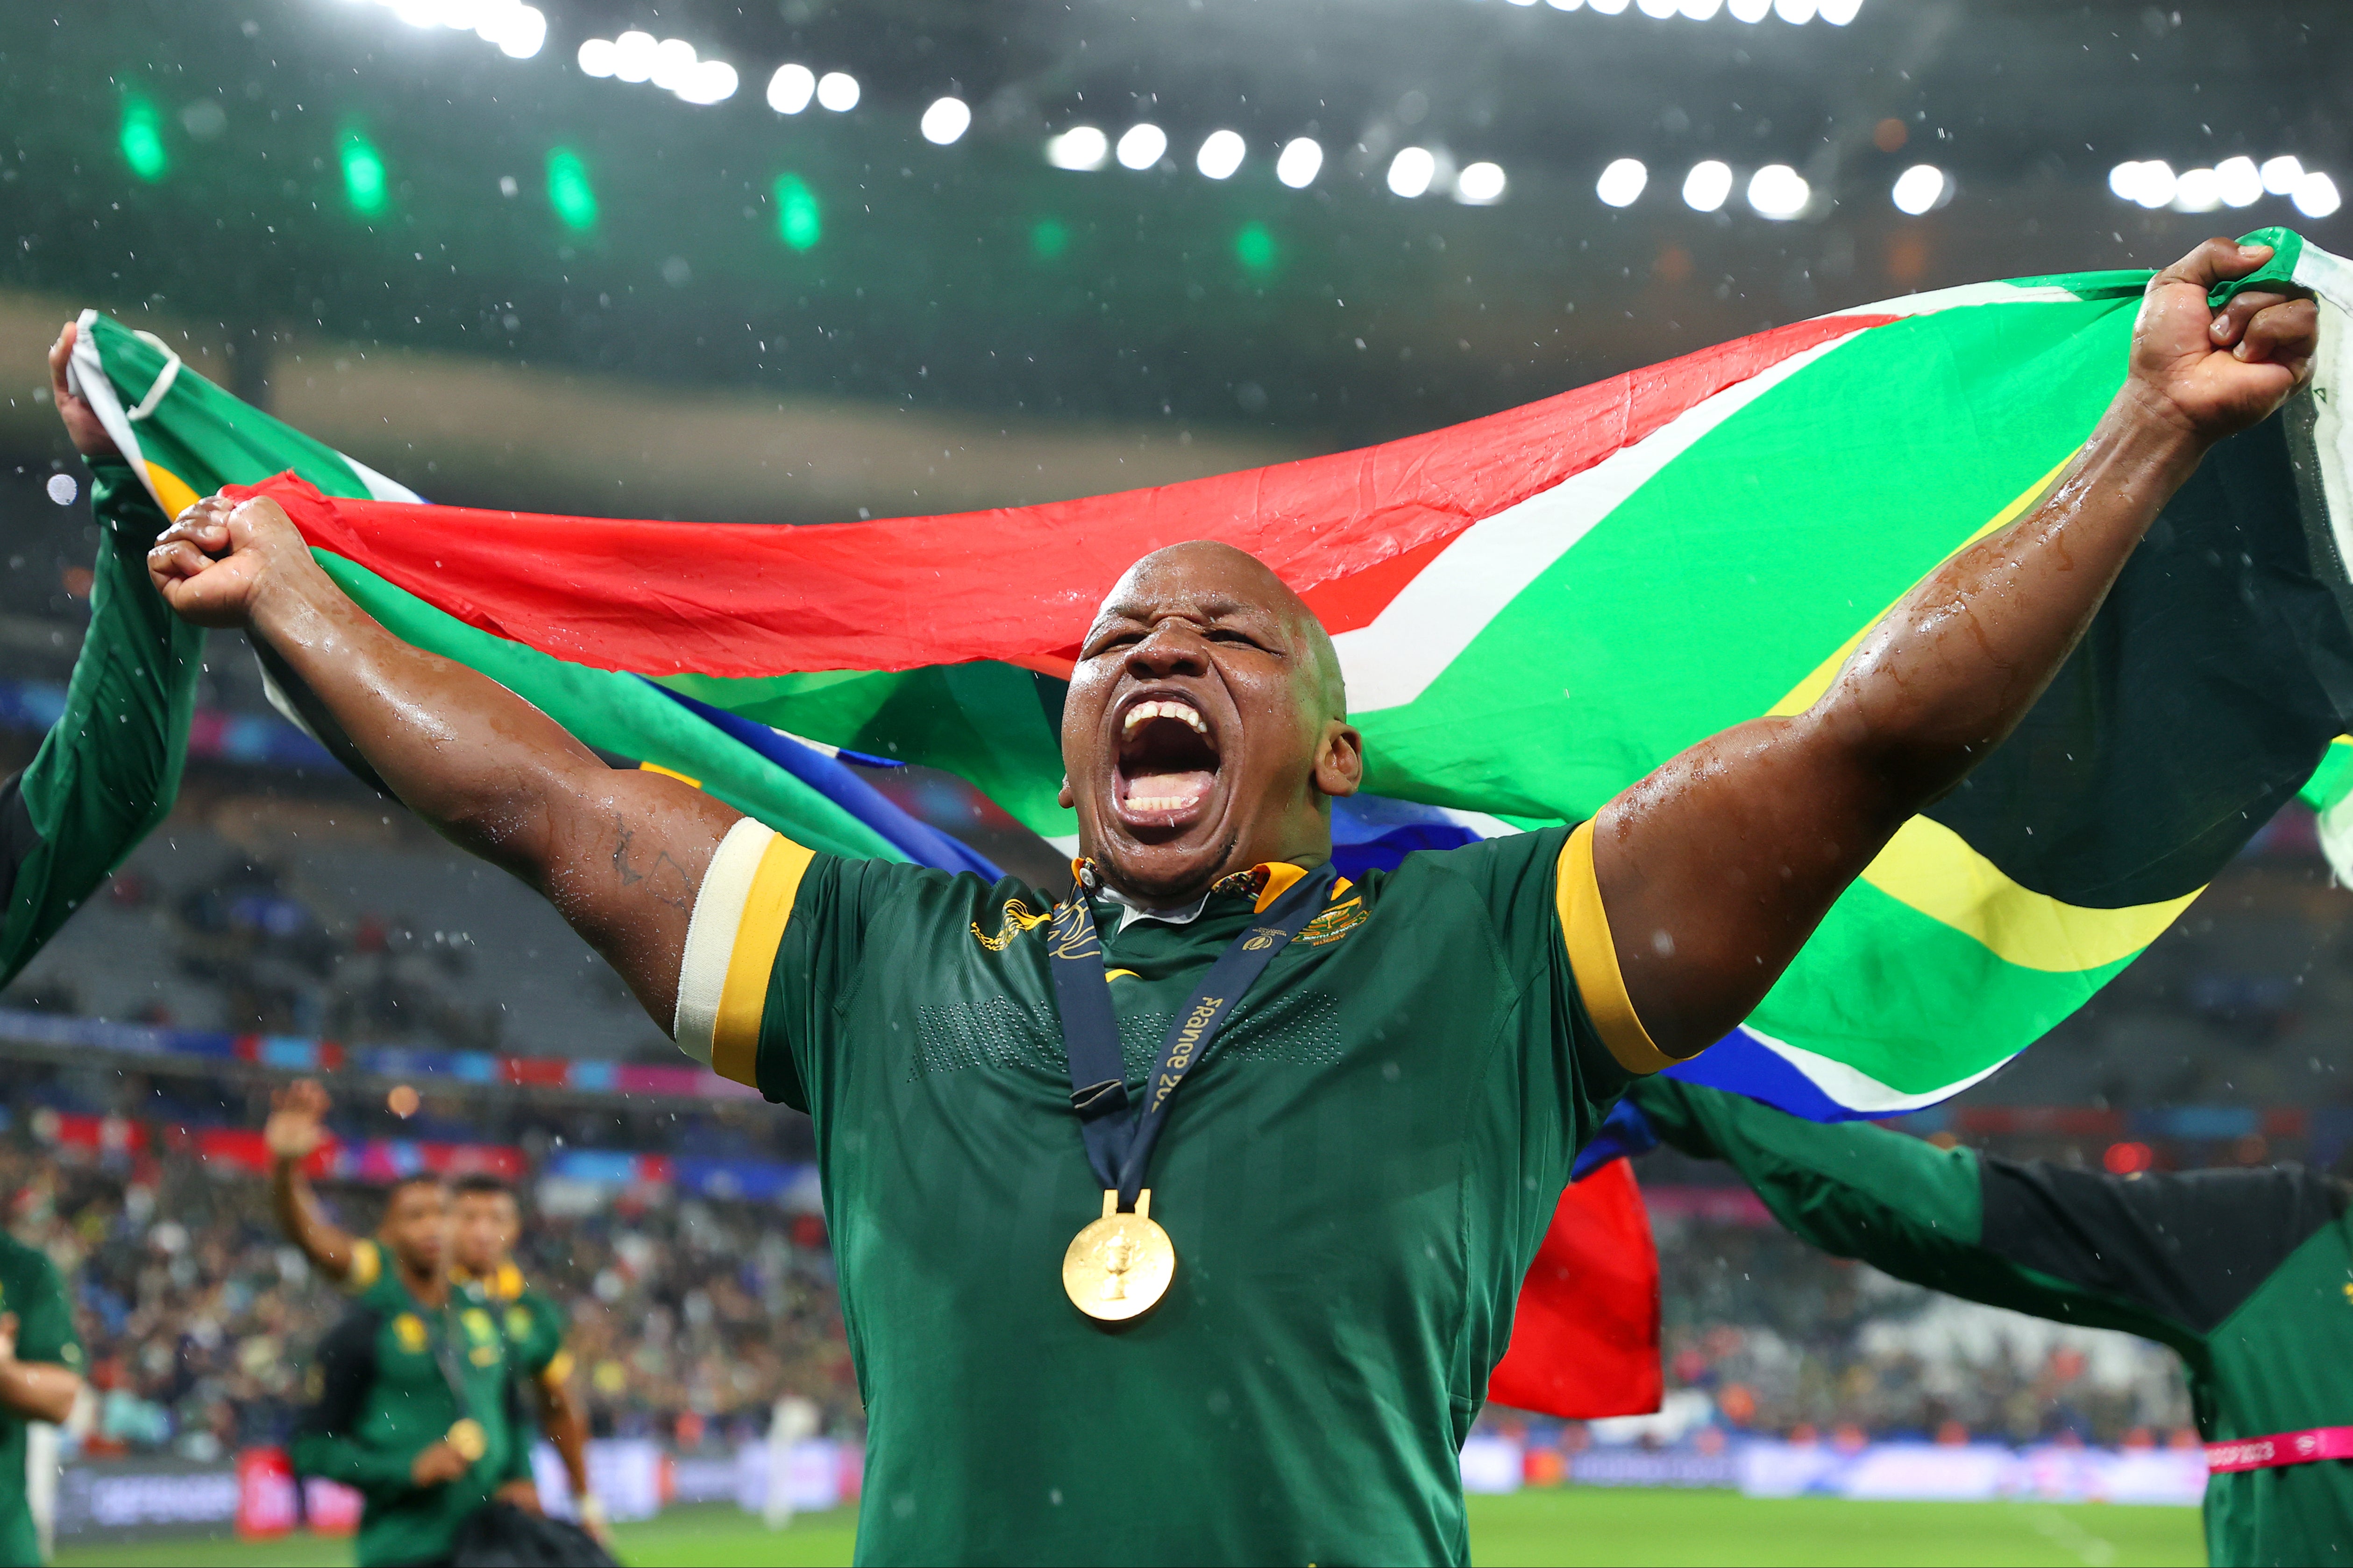 Bongi Mbonambi has been a key part of the back-to-back World Cup winning Springbok sides